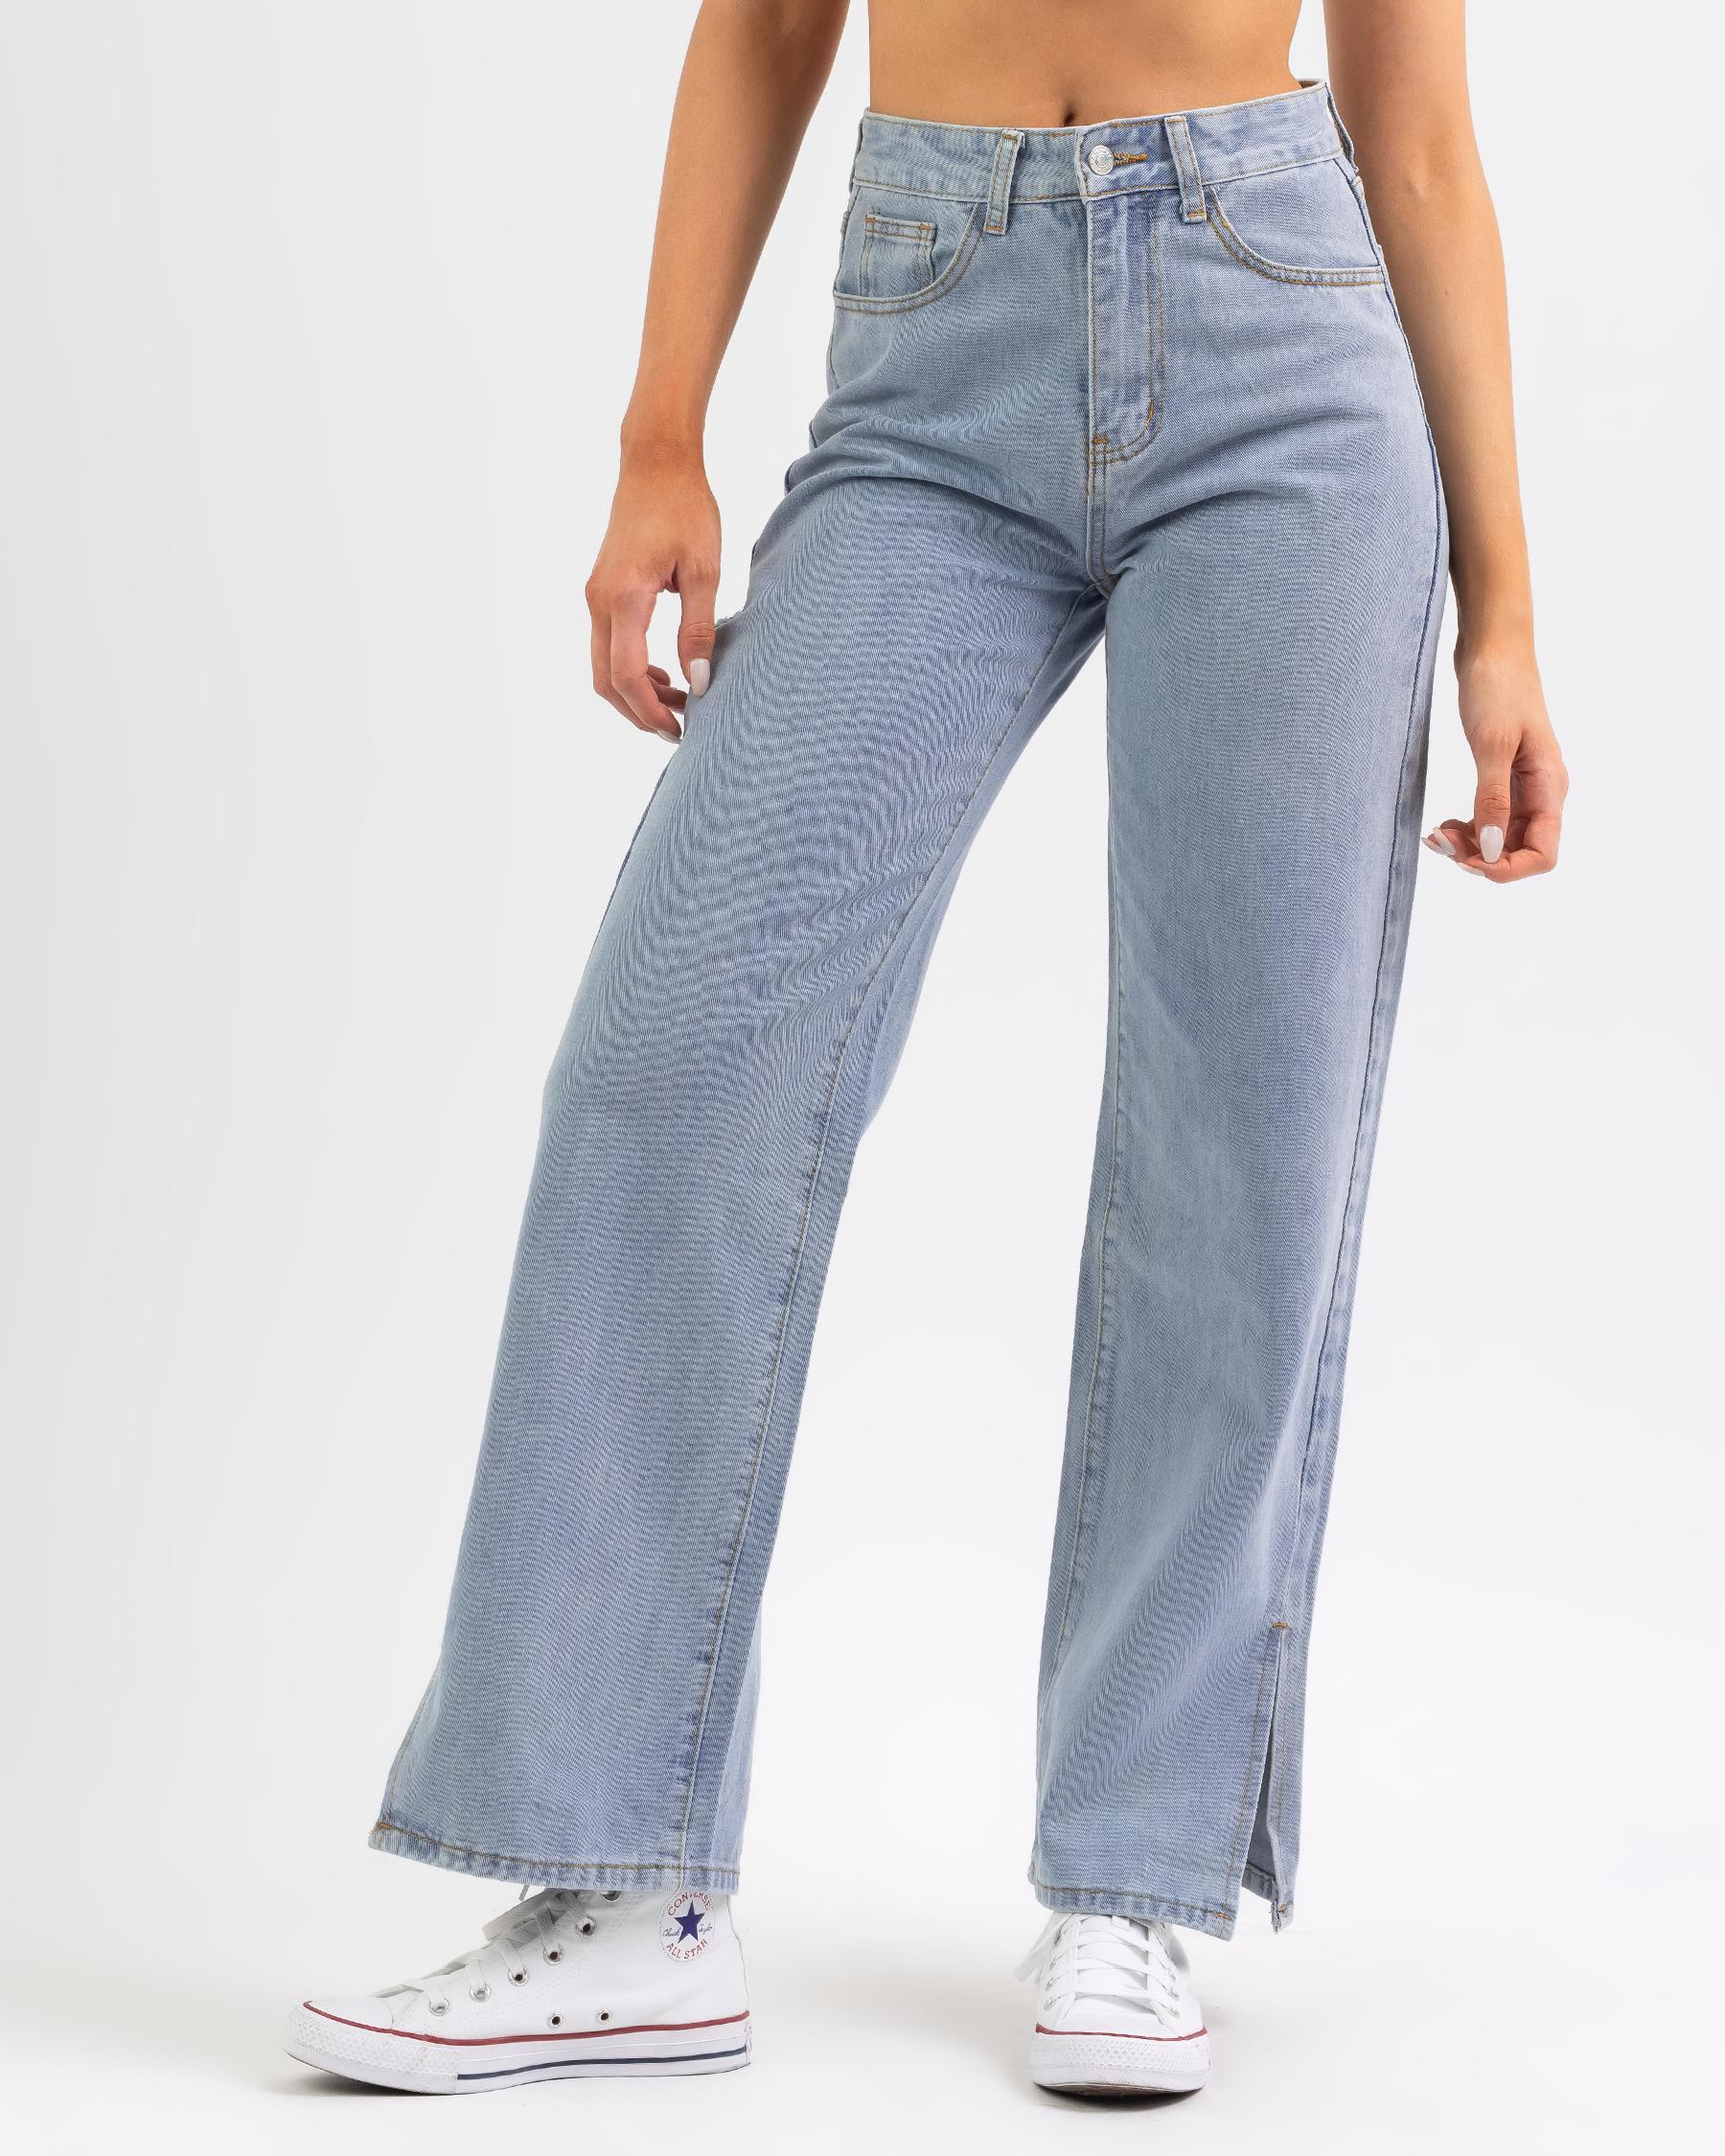 DESU Gabrielle Jeans In Light Mid - Fast Shipping & Easy Returns - City ...